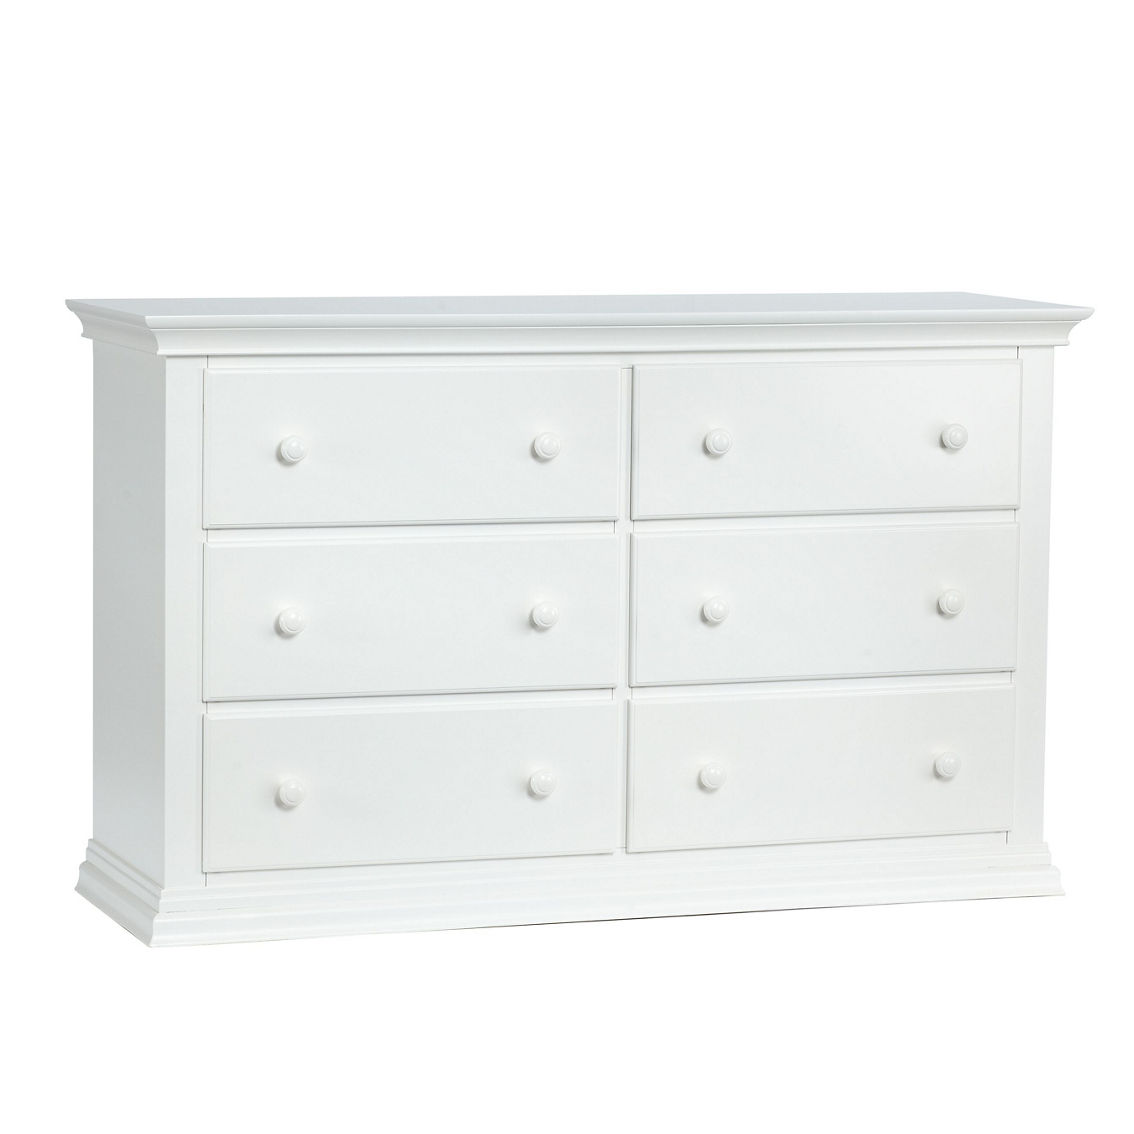 Suite Bebe Connelly Universal 6 Drawer Double Dresser White - Image 3 of 5